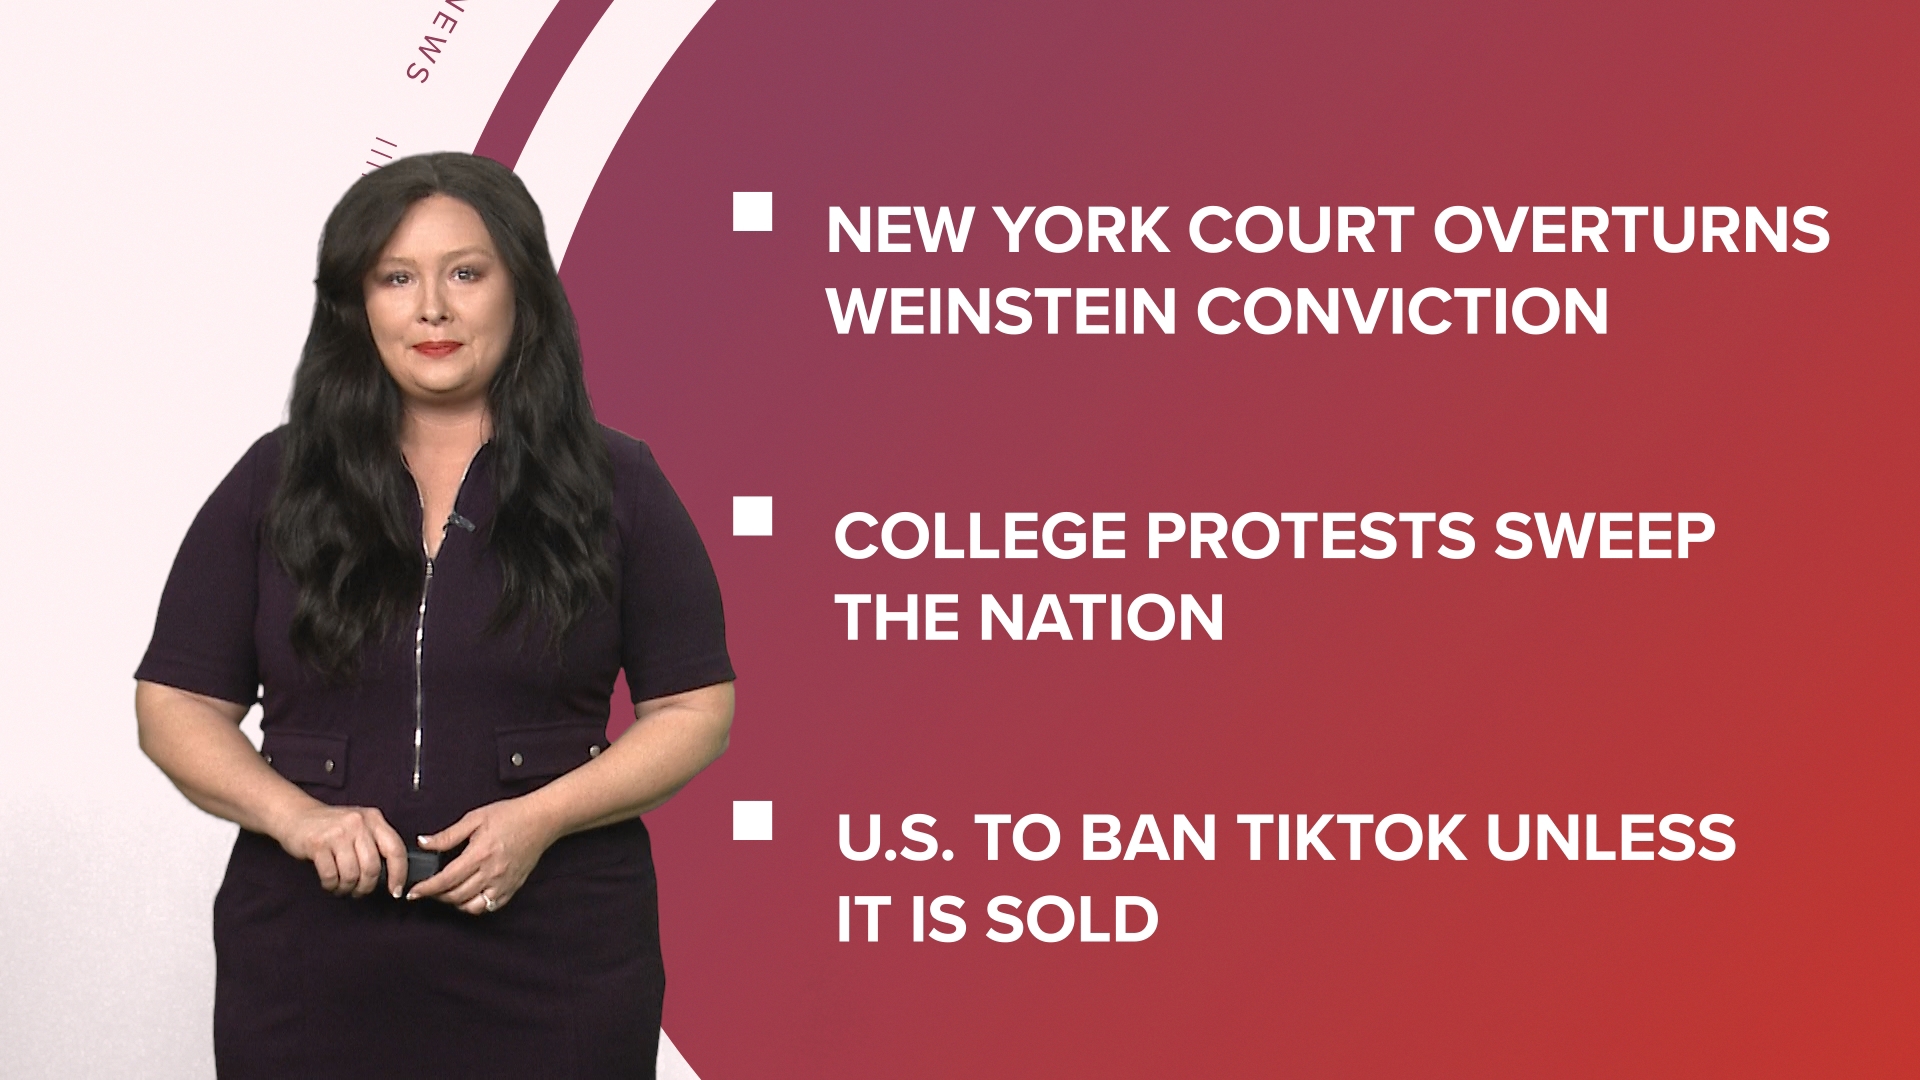 A look at what is happening in the news from a 2020 rape conviction overturned for Harvey Weinstein to college protests sweep the nation and more.